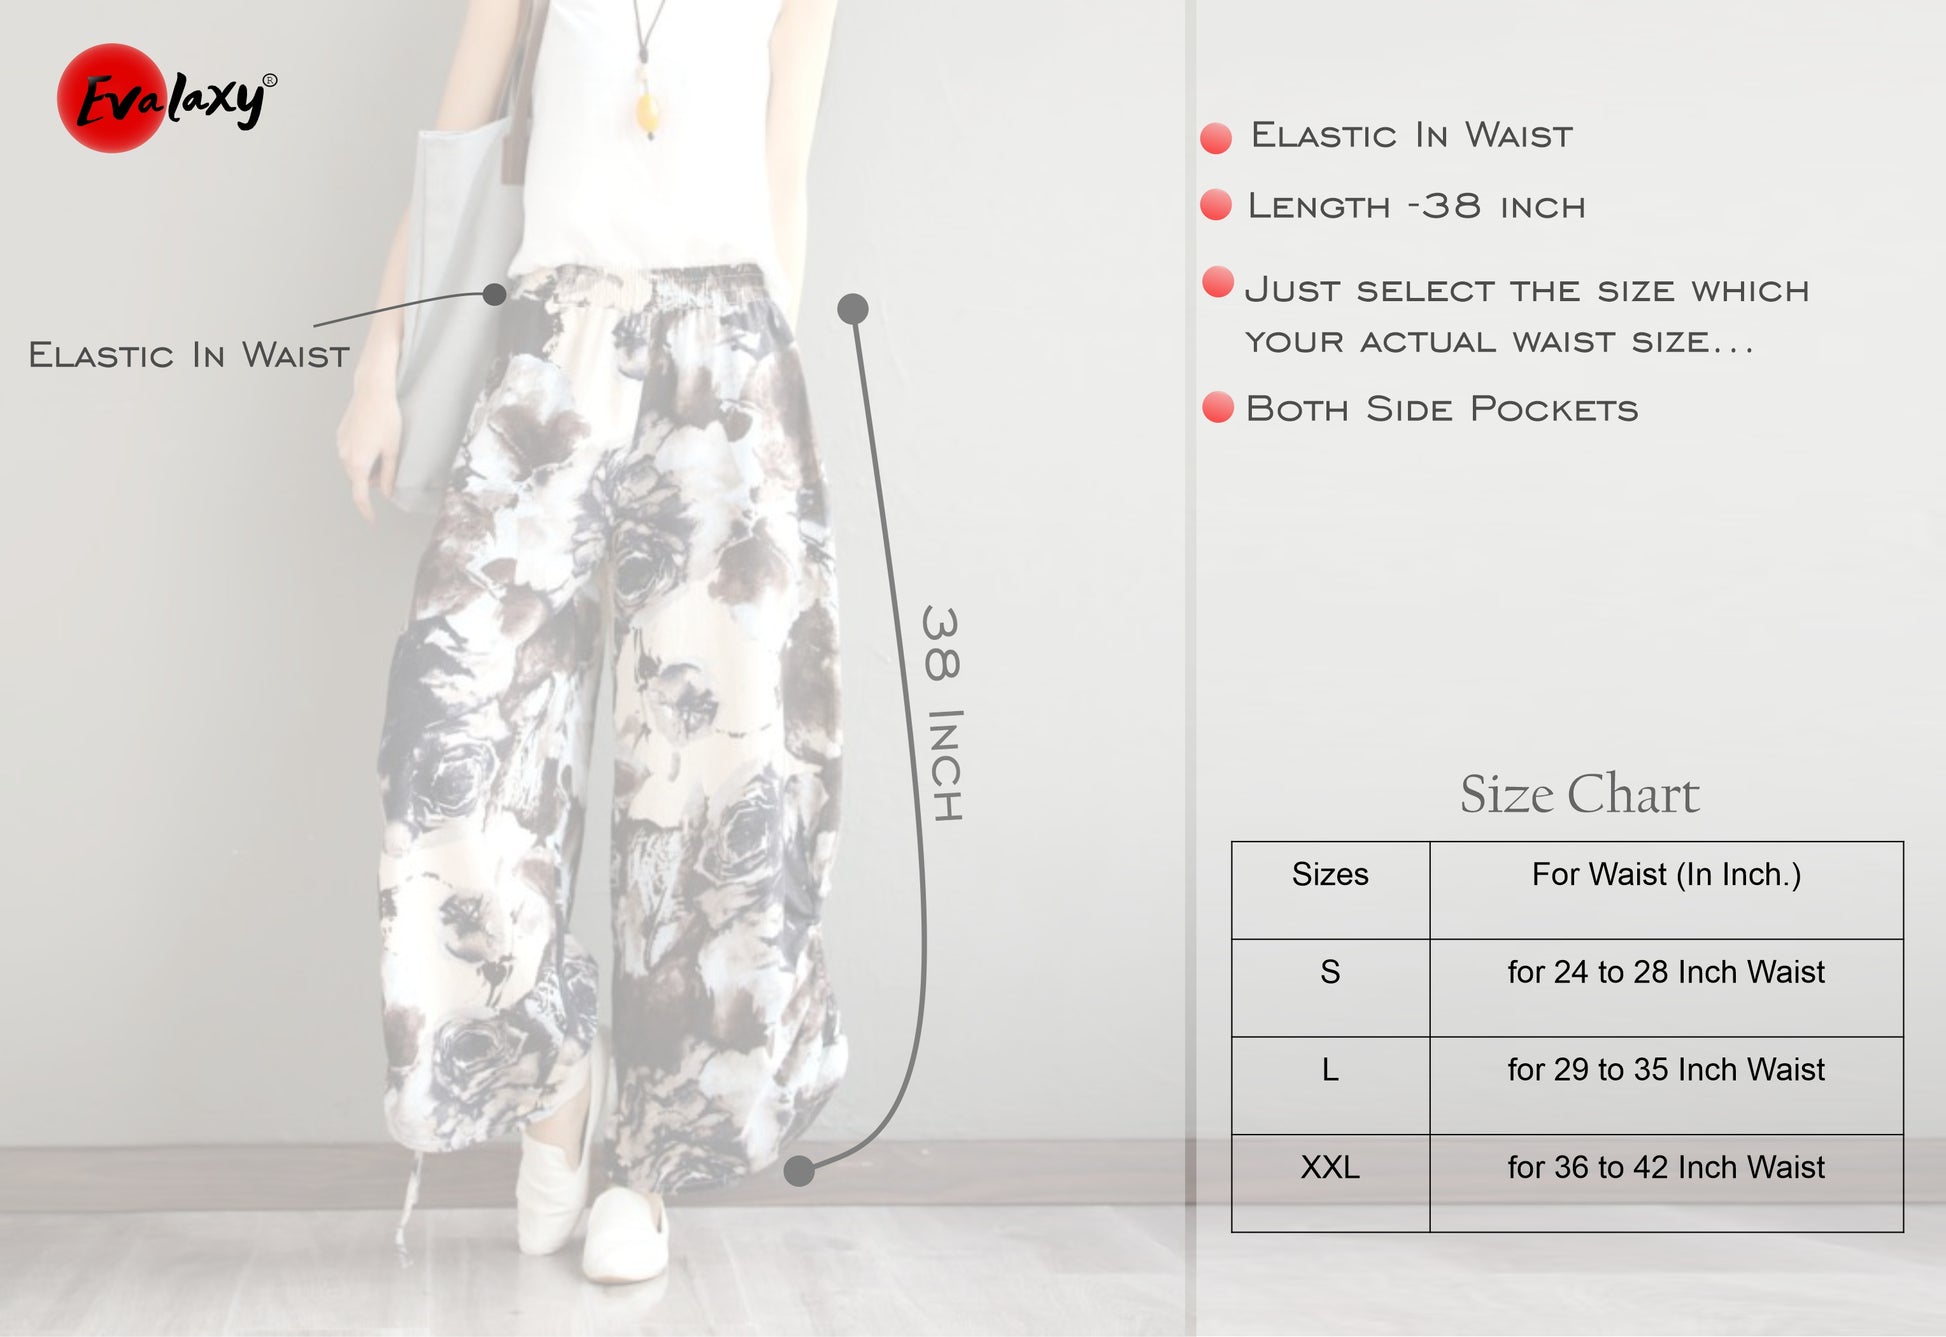 Empire waist peg trousers (new fabric options available) – Scott Fraser  Collection